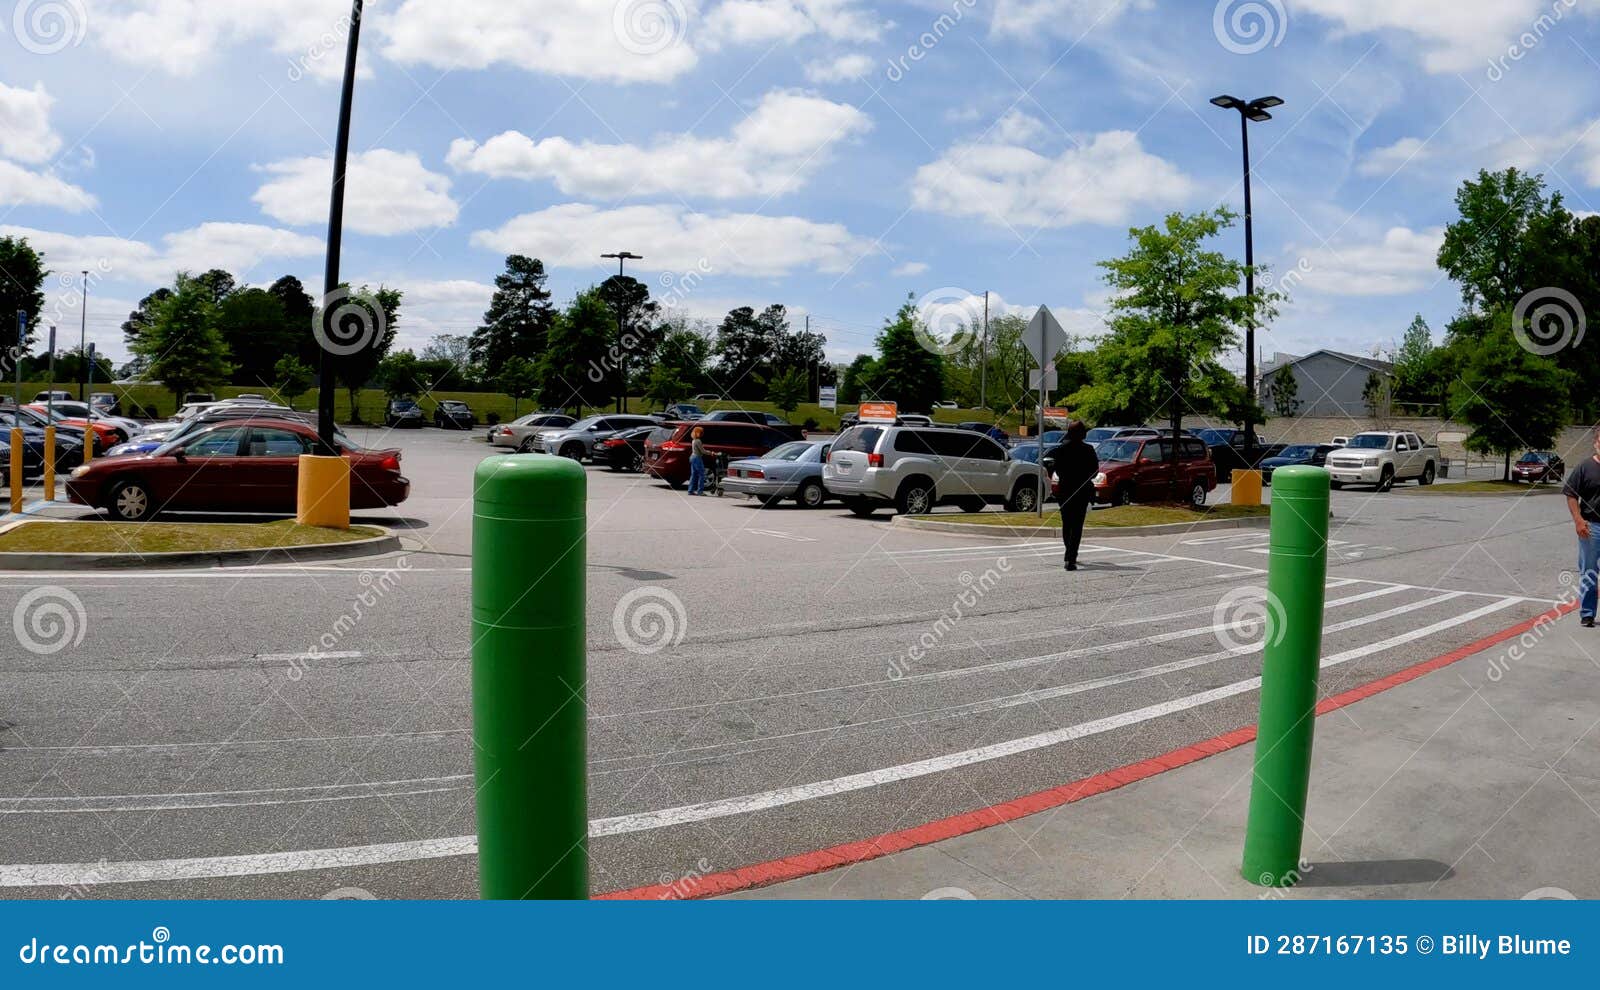 Walmart Grocery Store Exterior Green Poles Outside Editorial Image